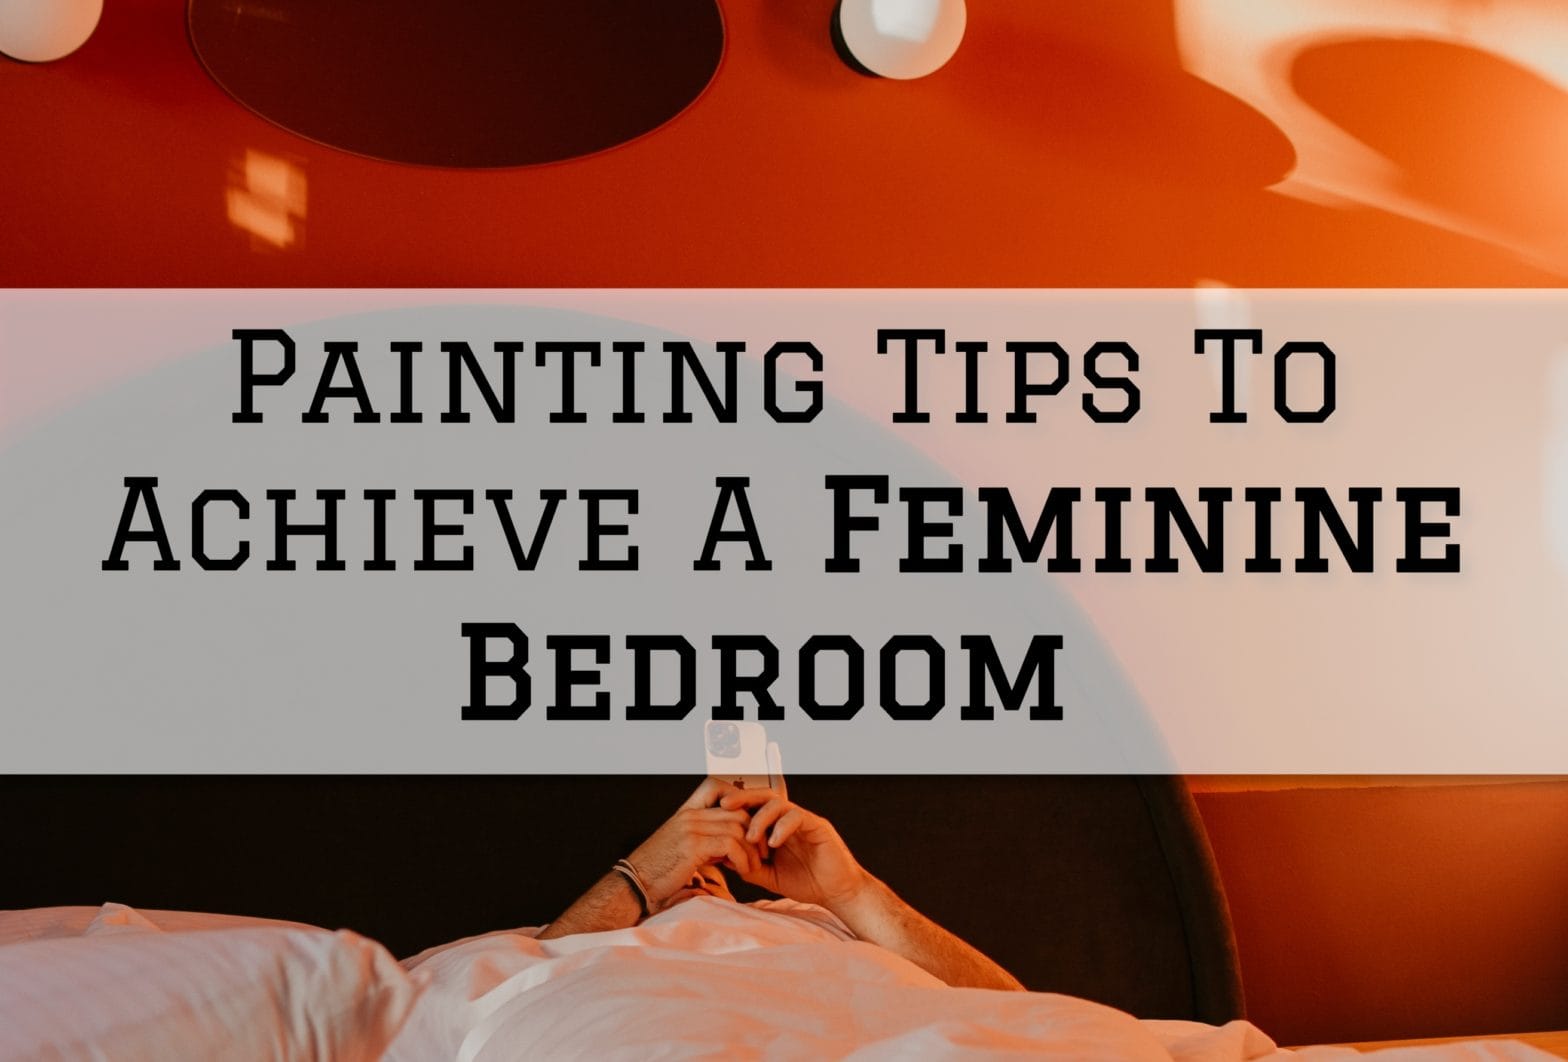 2023-02-01 Painting and Wallpapering Hamilton Ontario Painting Tips To Achieve A Feminine Bedroom